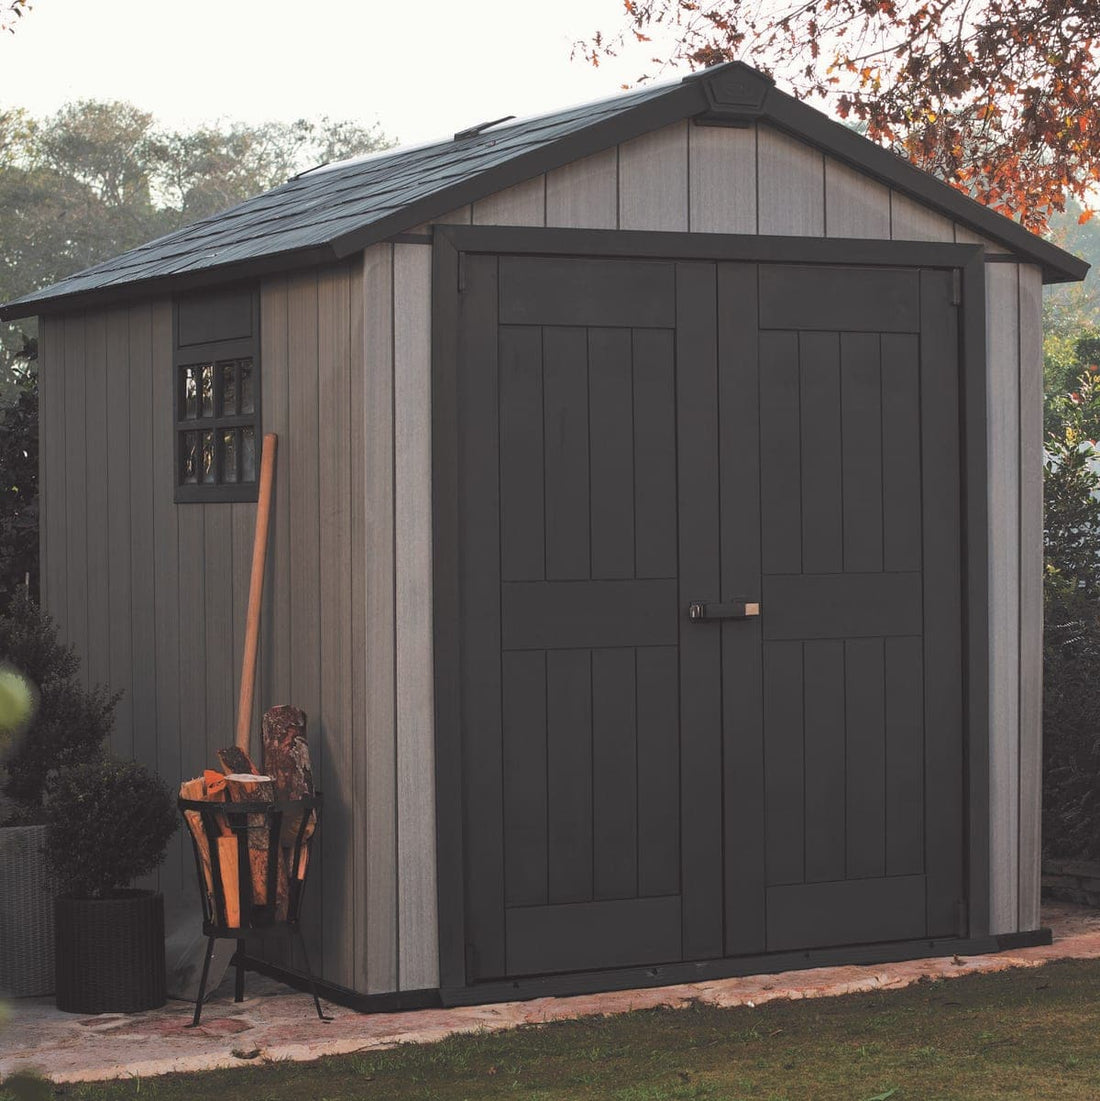 GARDEN SHED OAKLAND 759 THICKNESS 20MM EXTERNAL DIMENSIONS 279X210X242H FLOOR INCLUDED - best price from Maltashopper.com BR500013053